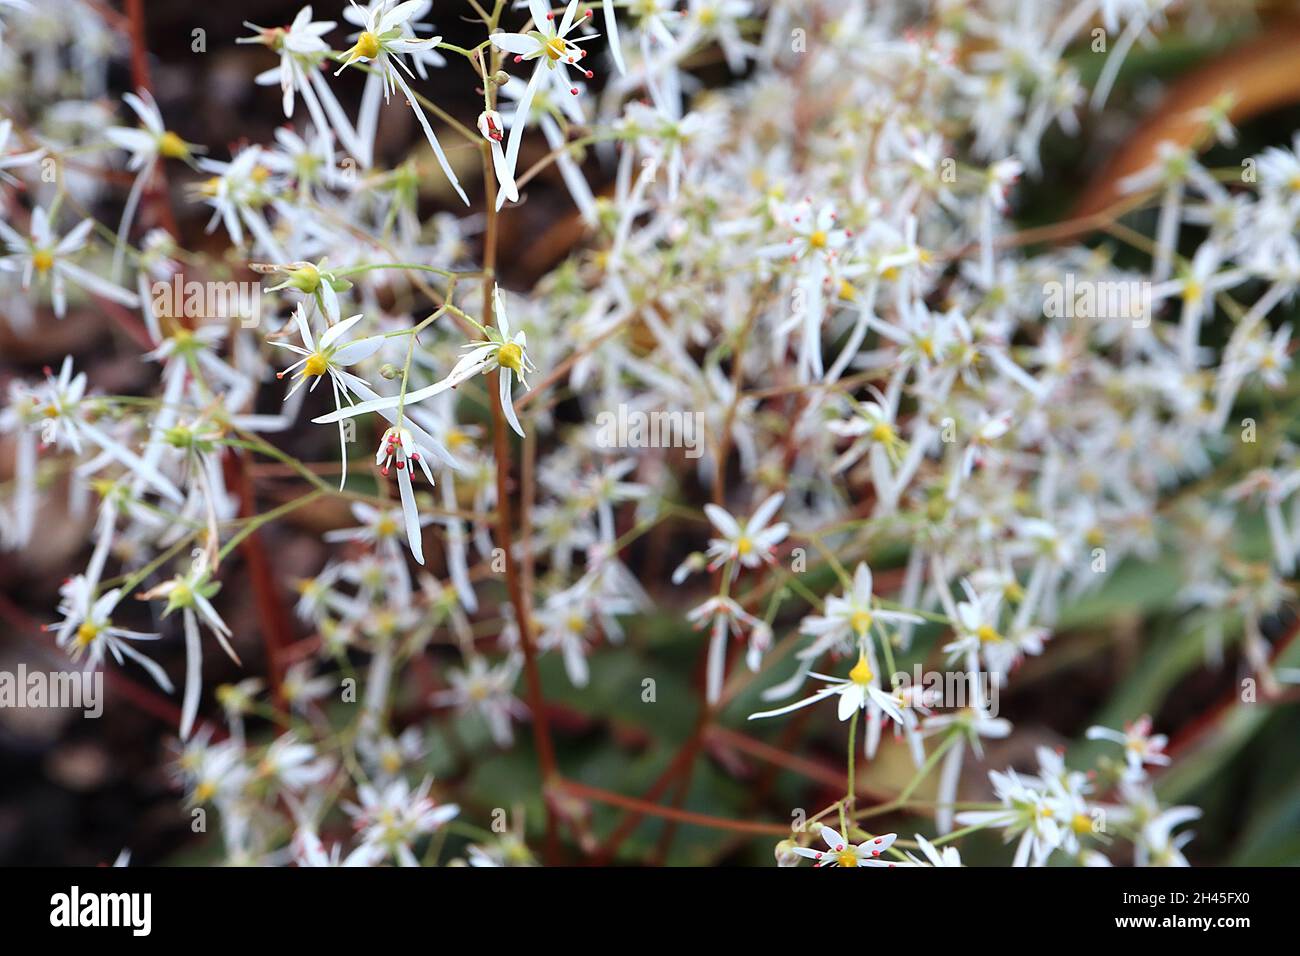 Saxifraga fortunei var incisolobata mass of airy sprays of tiny white flowers with one long petal,  October, England, UK Stock Photo